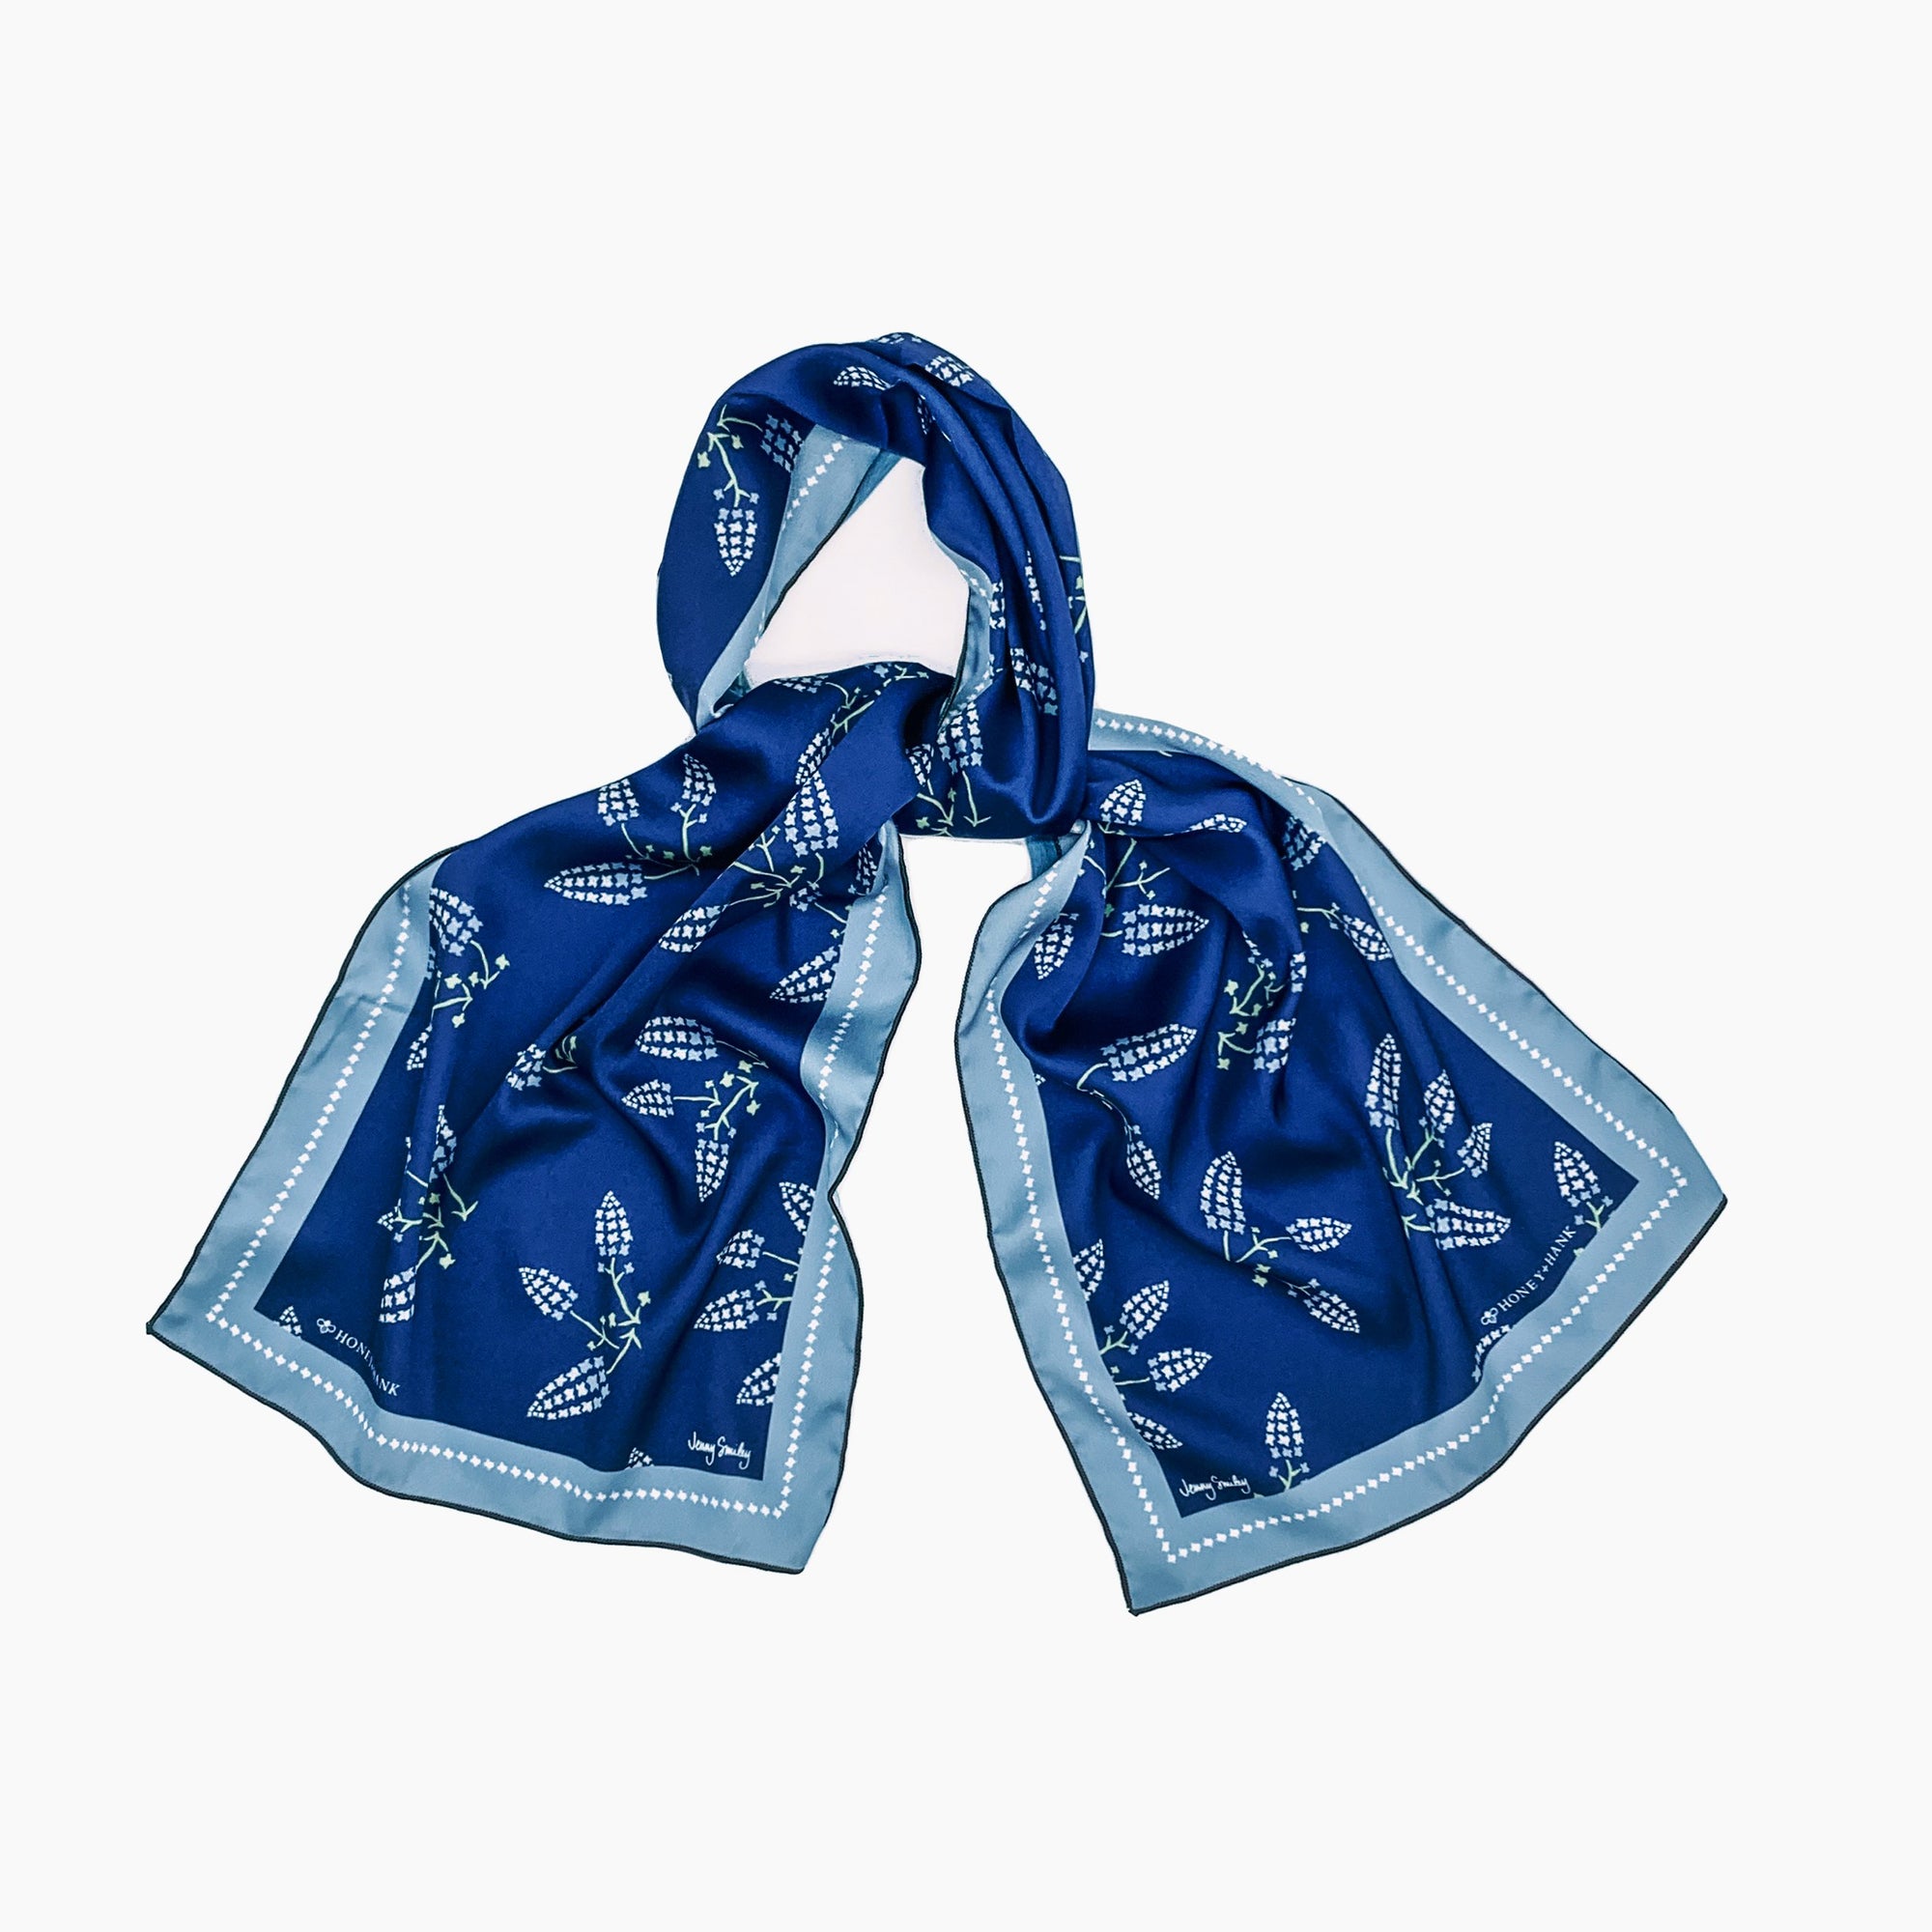 This versatile Texas Bluebonnets scarf, with hidden state icons, can be worn so many ways: around your neck, on your bag, in your hair, even tied into your boots on gameday!